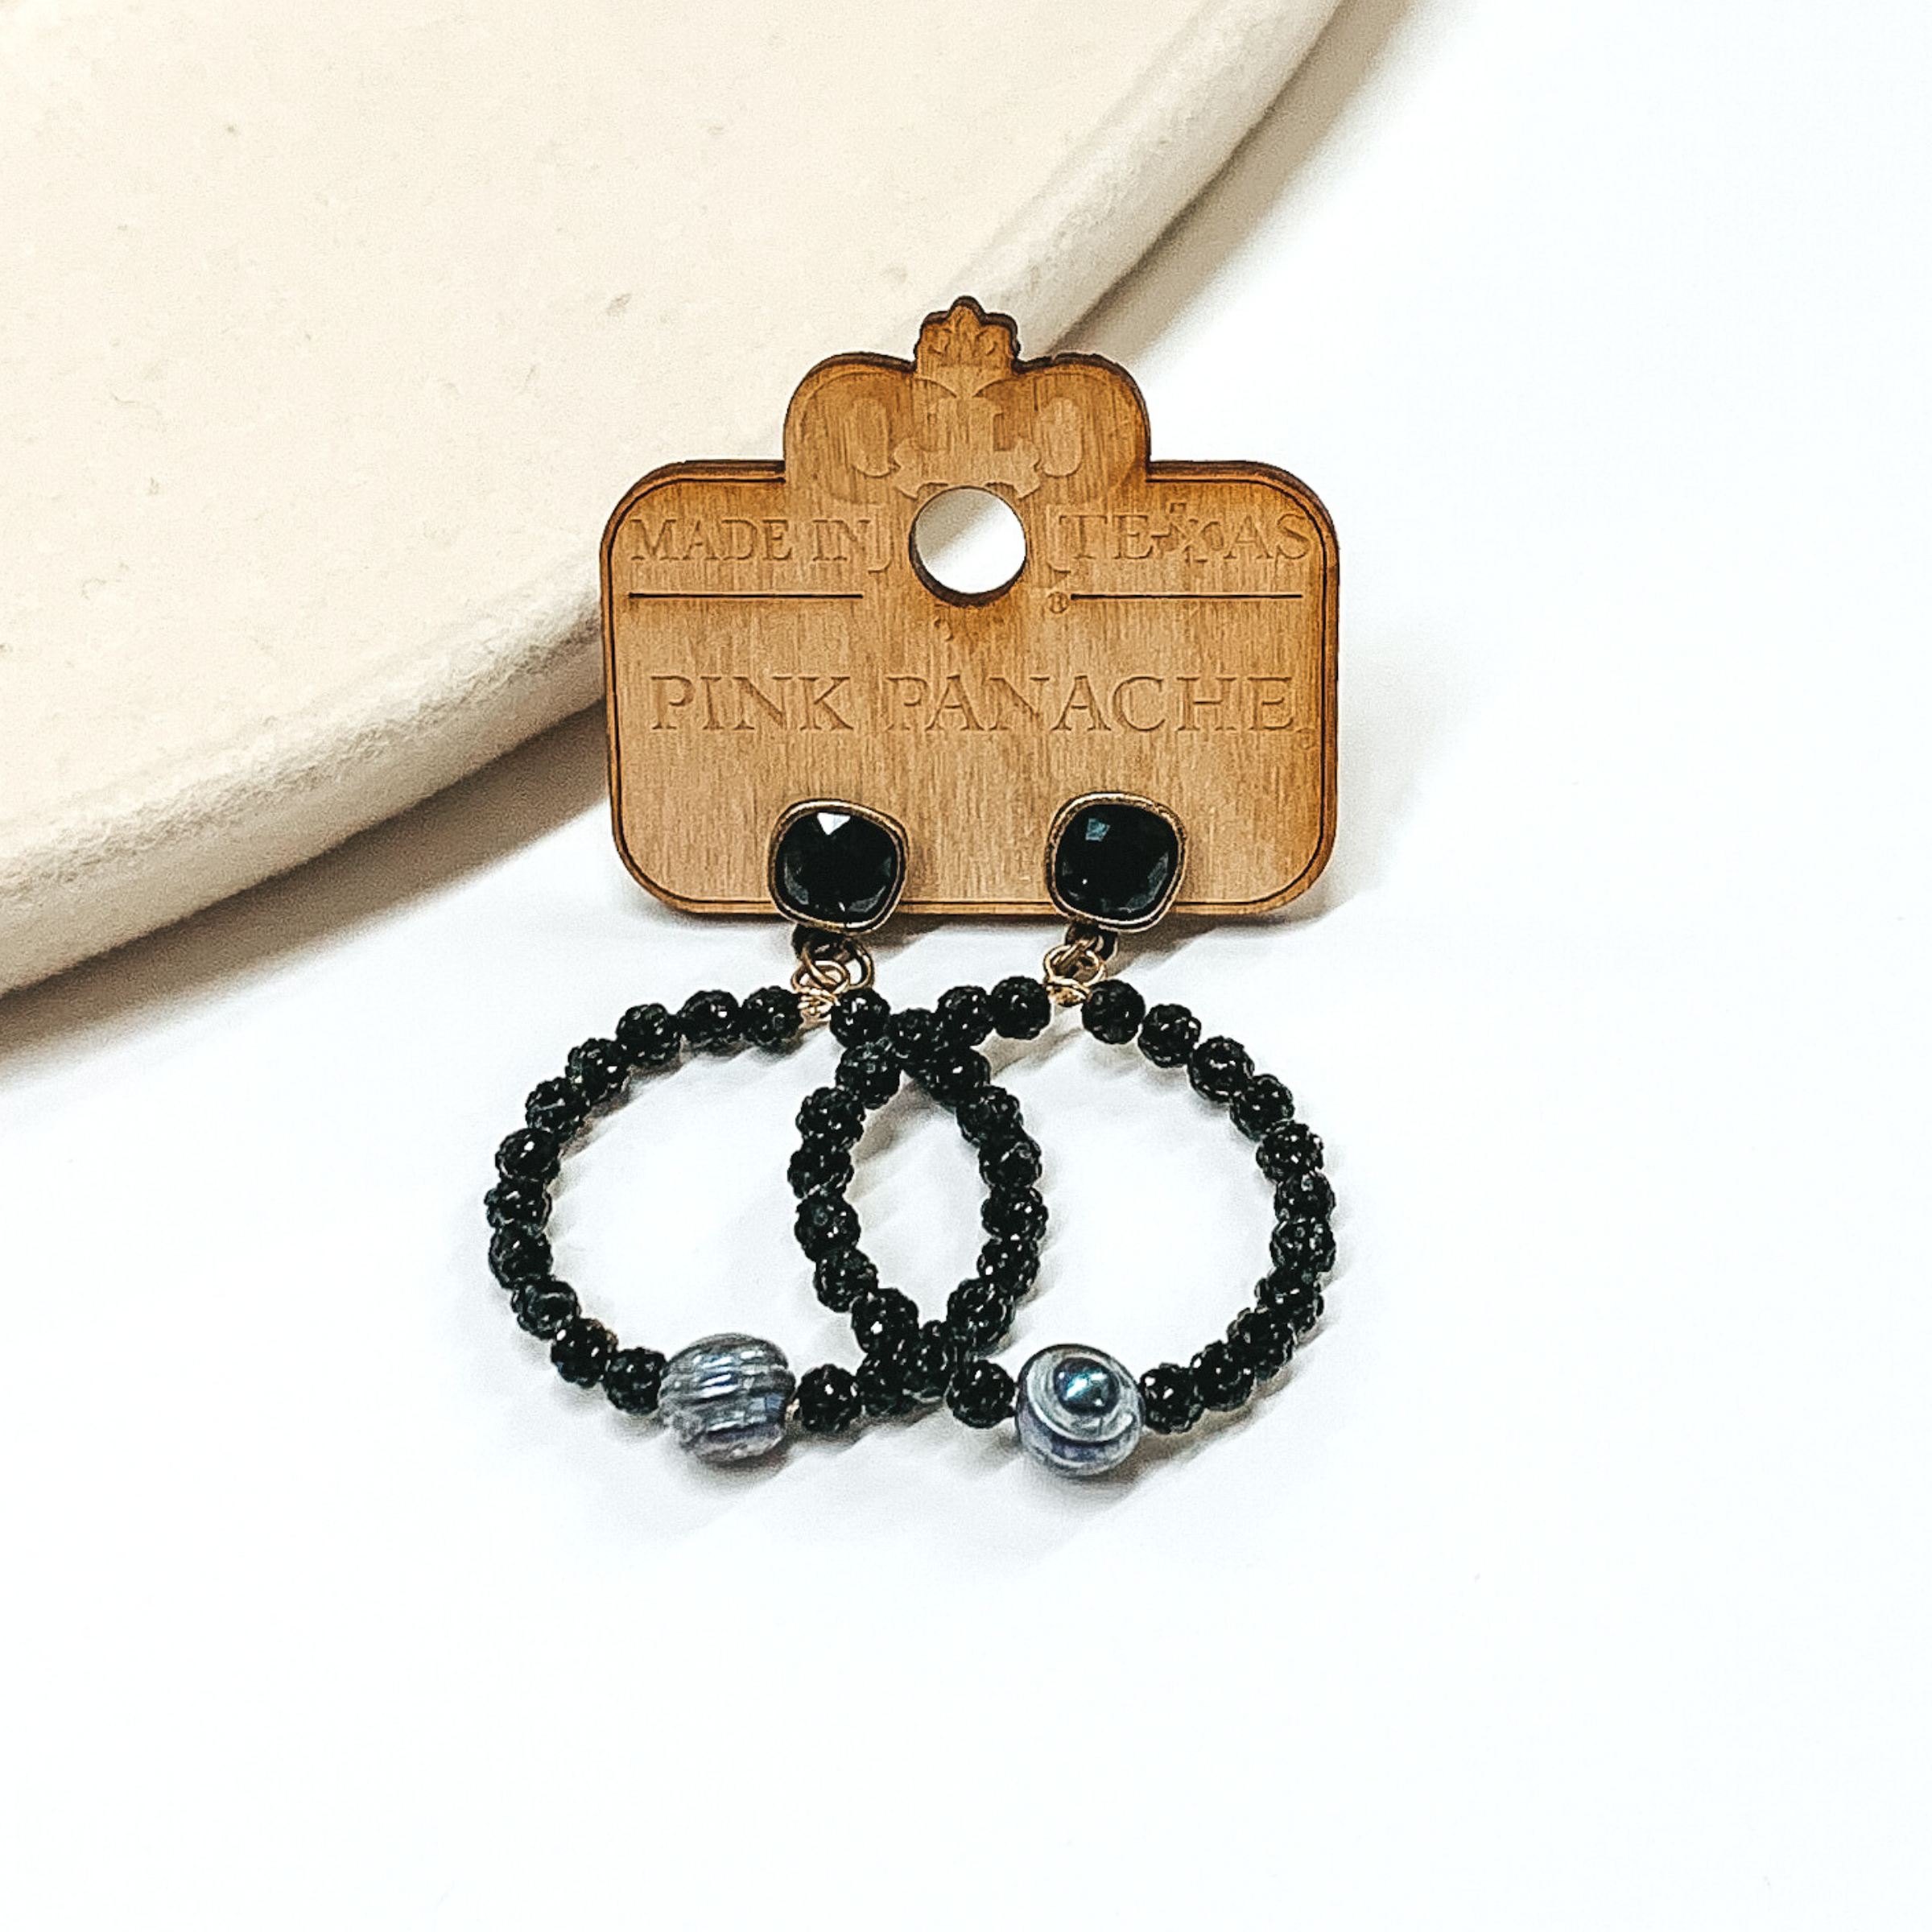 Black cushion cut crystal studs with hanging circle pendant. The circle pendant is covered in black crystal beads  with a black pearl bead at the bottom. 